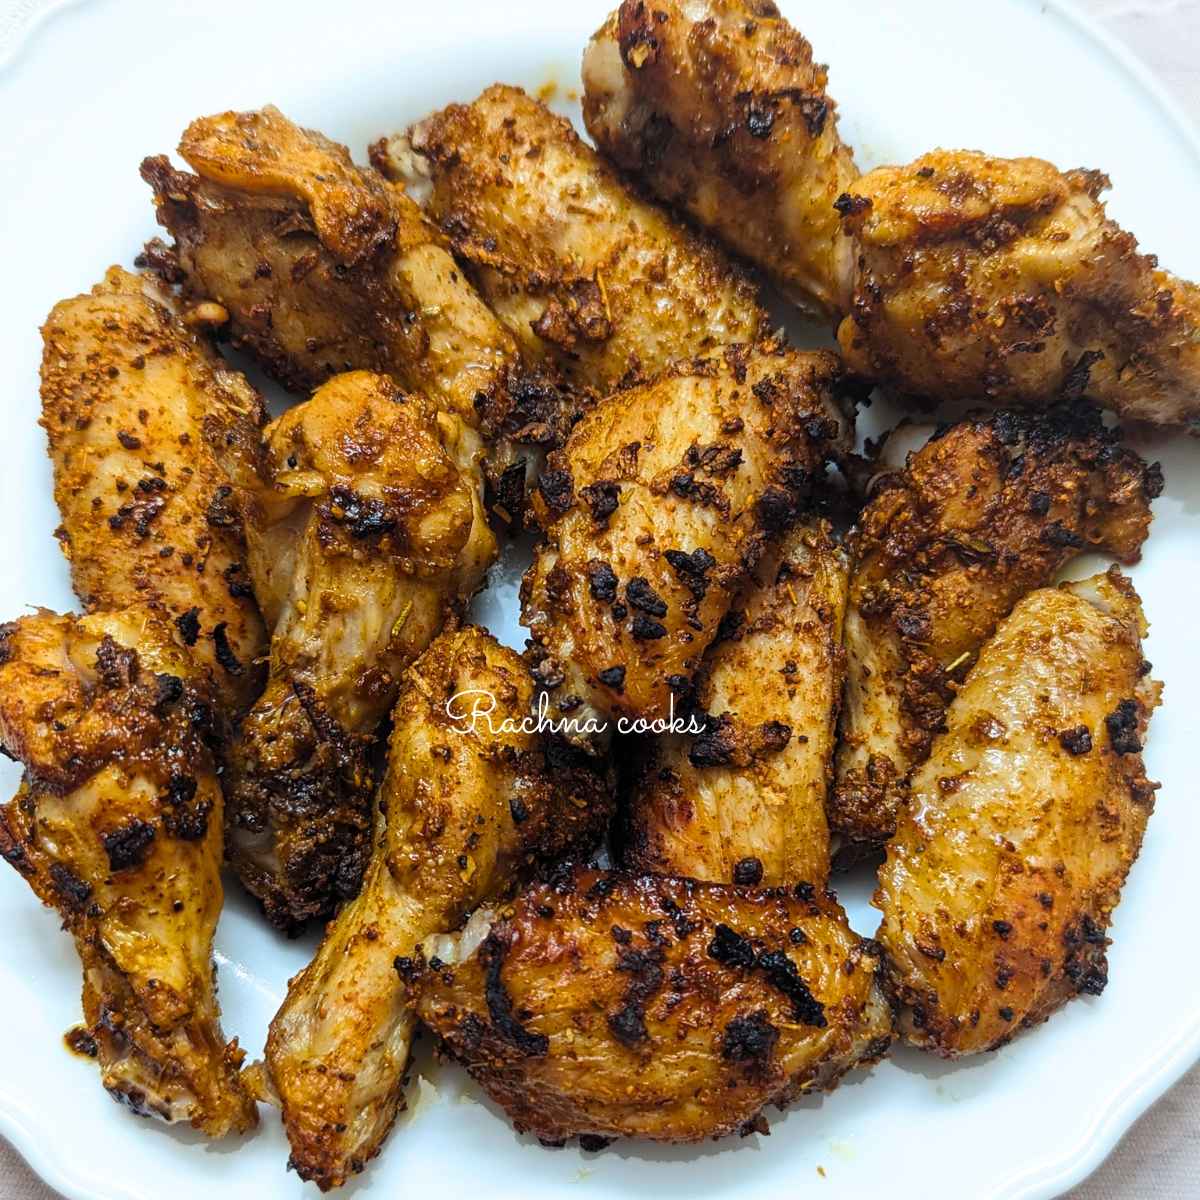 Jerk chicken wings after air frying on a white plate.